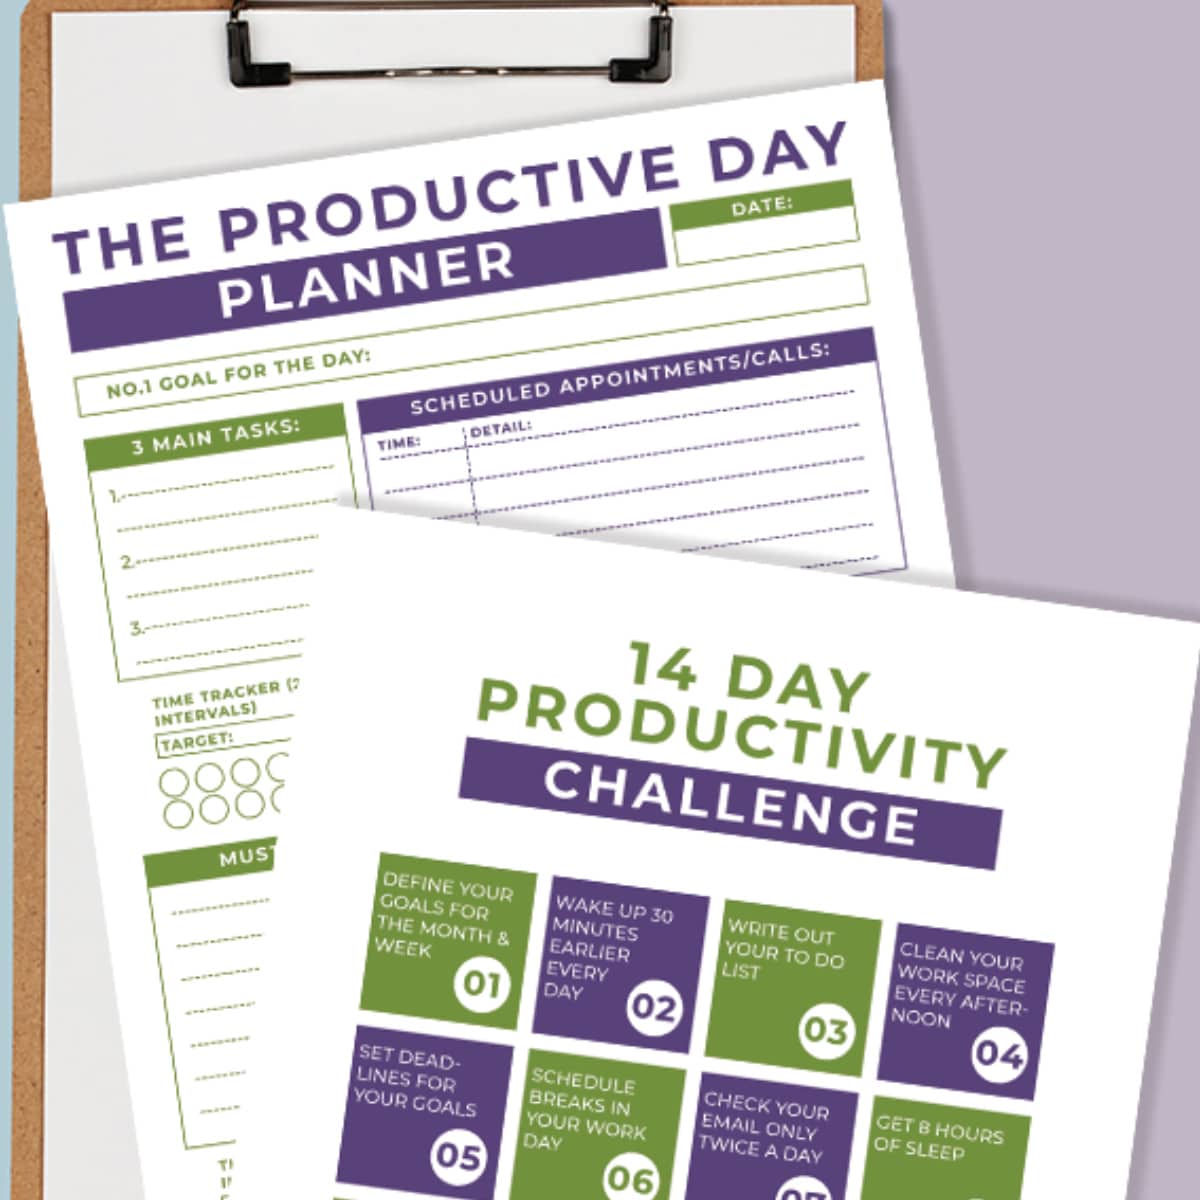 Are You Busy? Or Are You Productive?